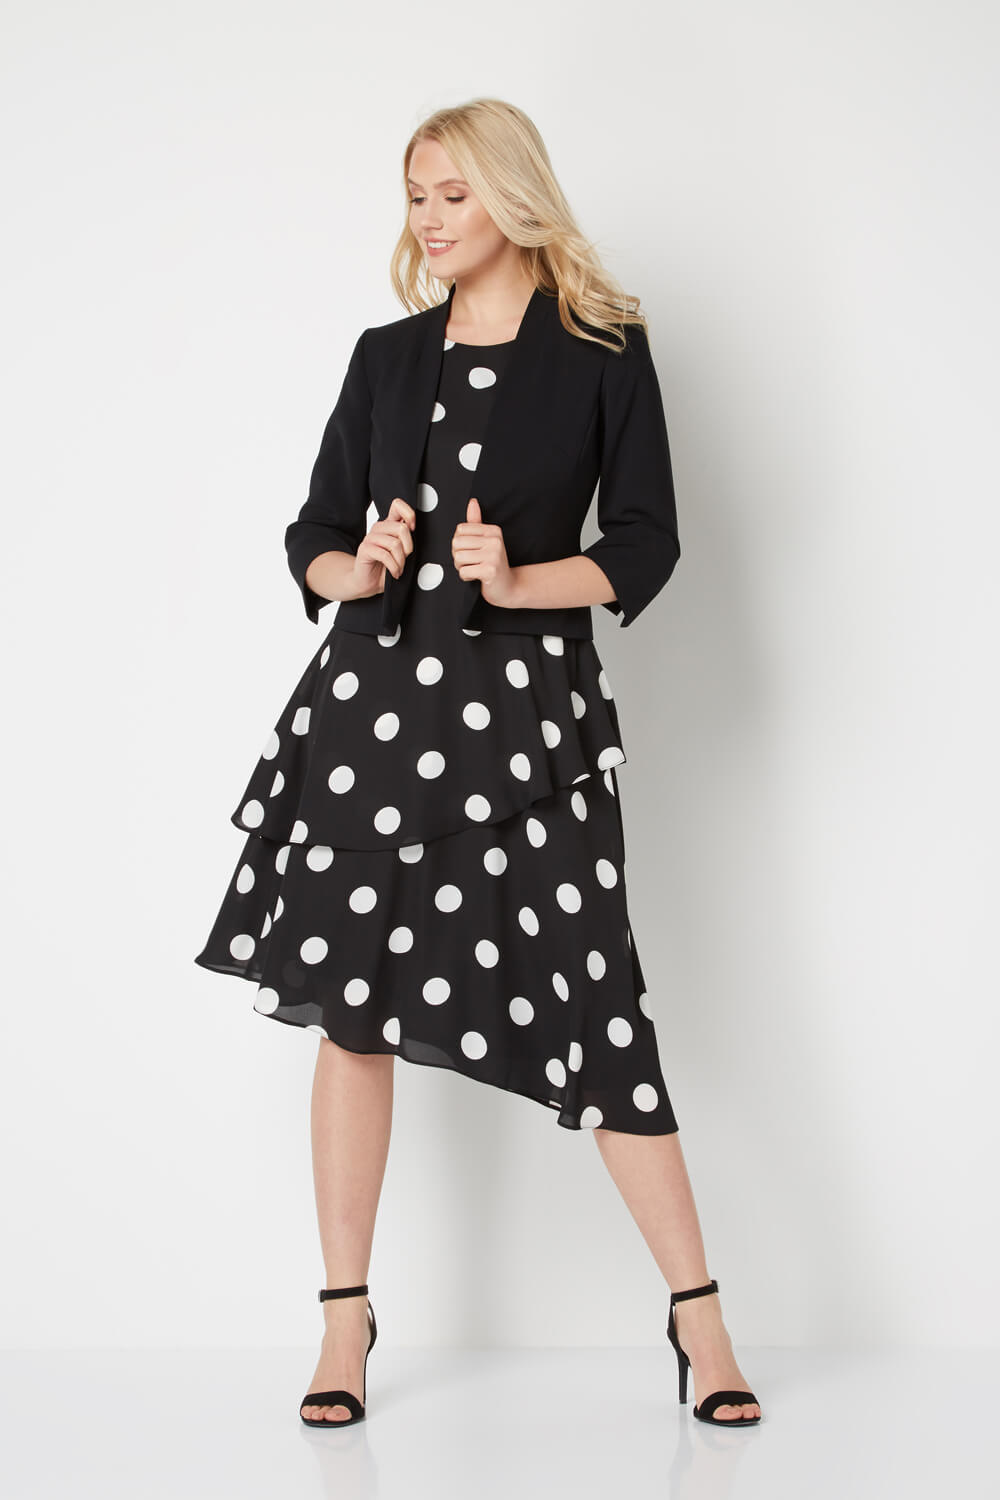 Black Spot Print Fit and Flare Dress, Image 4 of 5